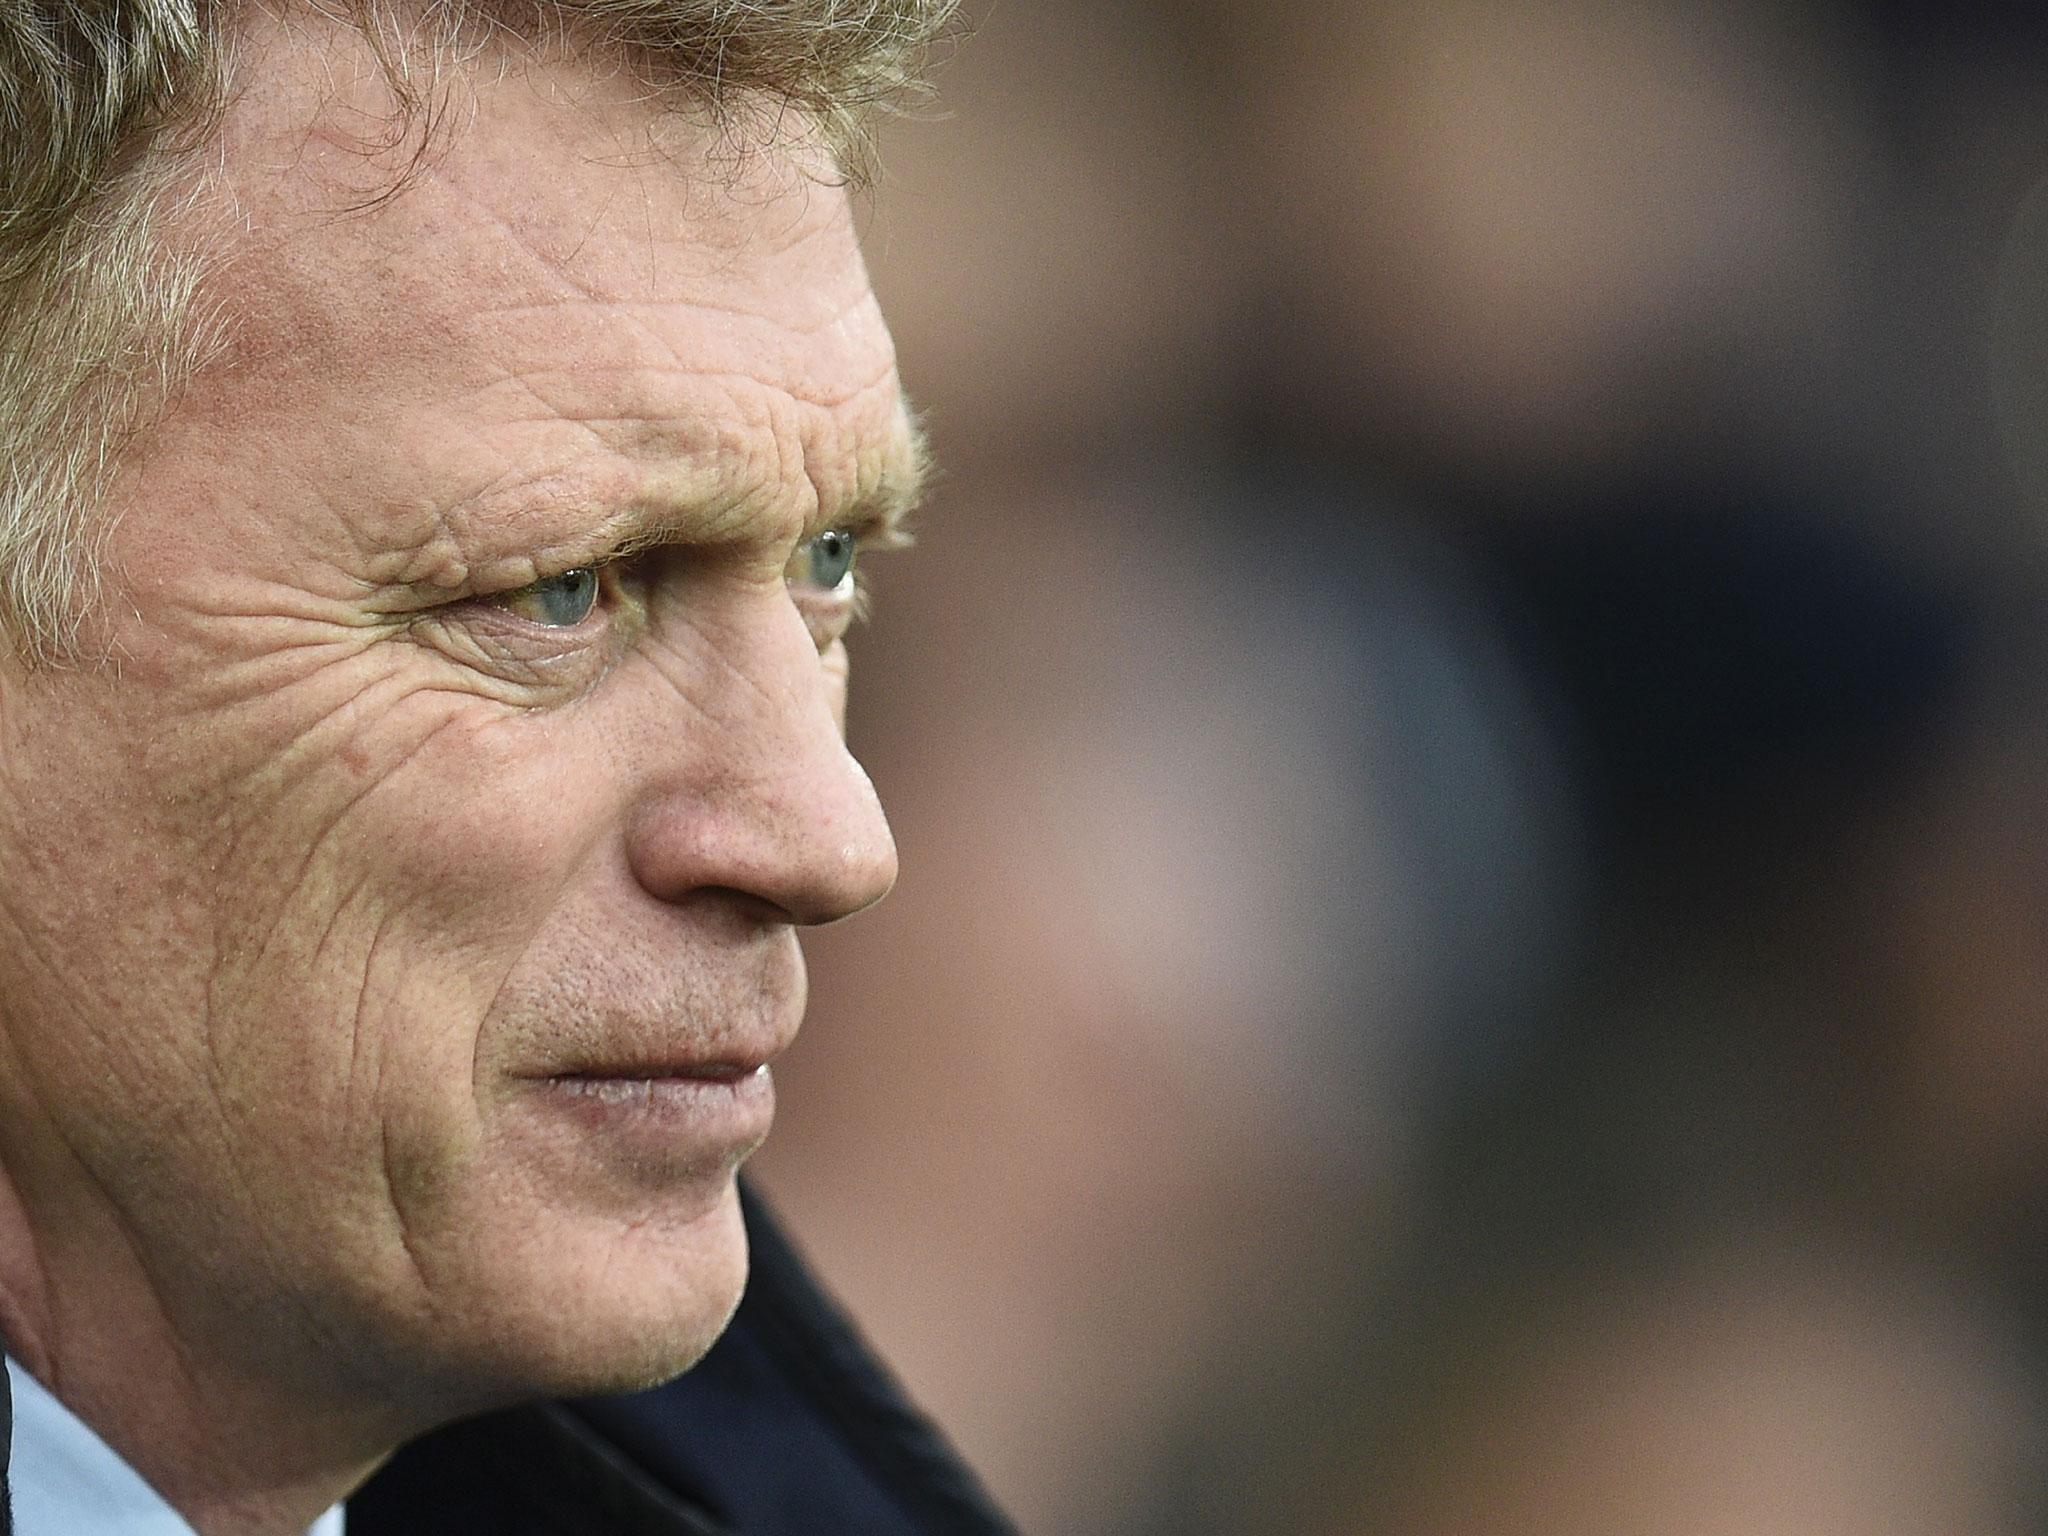 Asked about the week, Moyes said he was surprised by some of the criticism he'd received